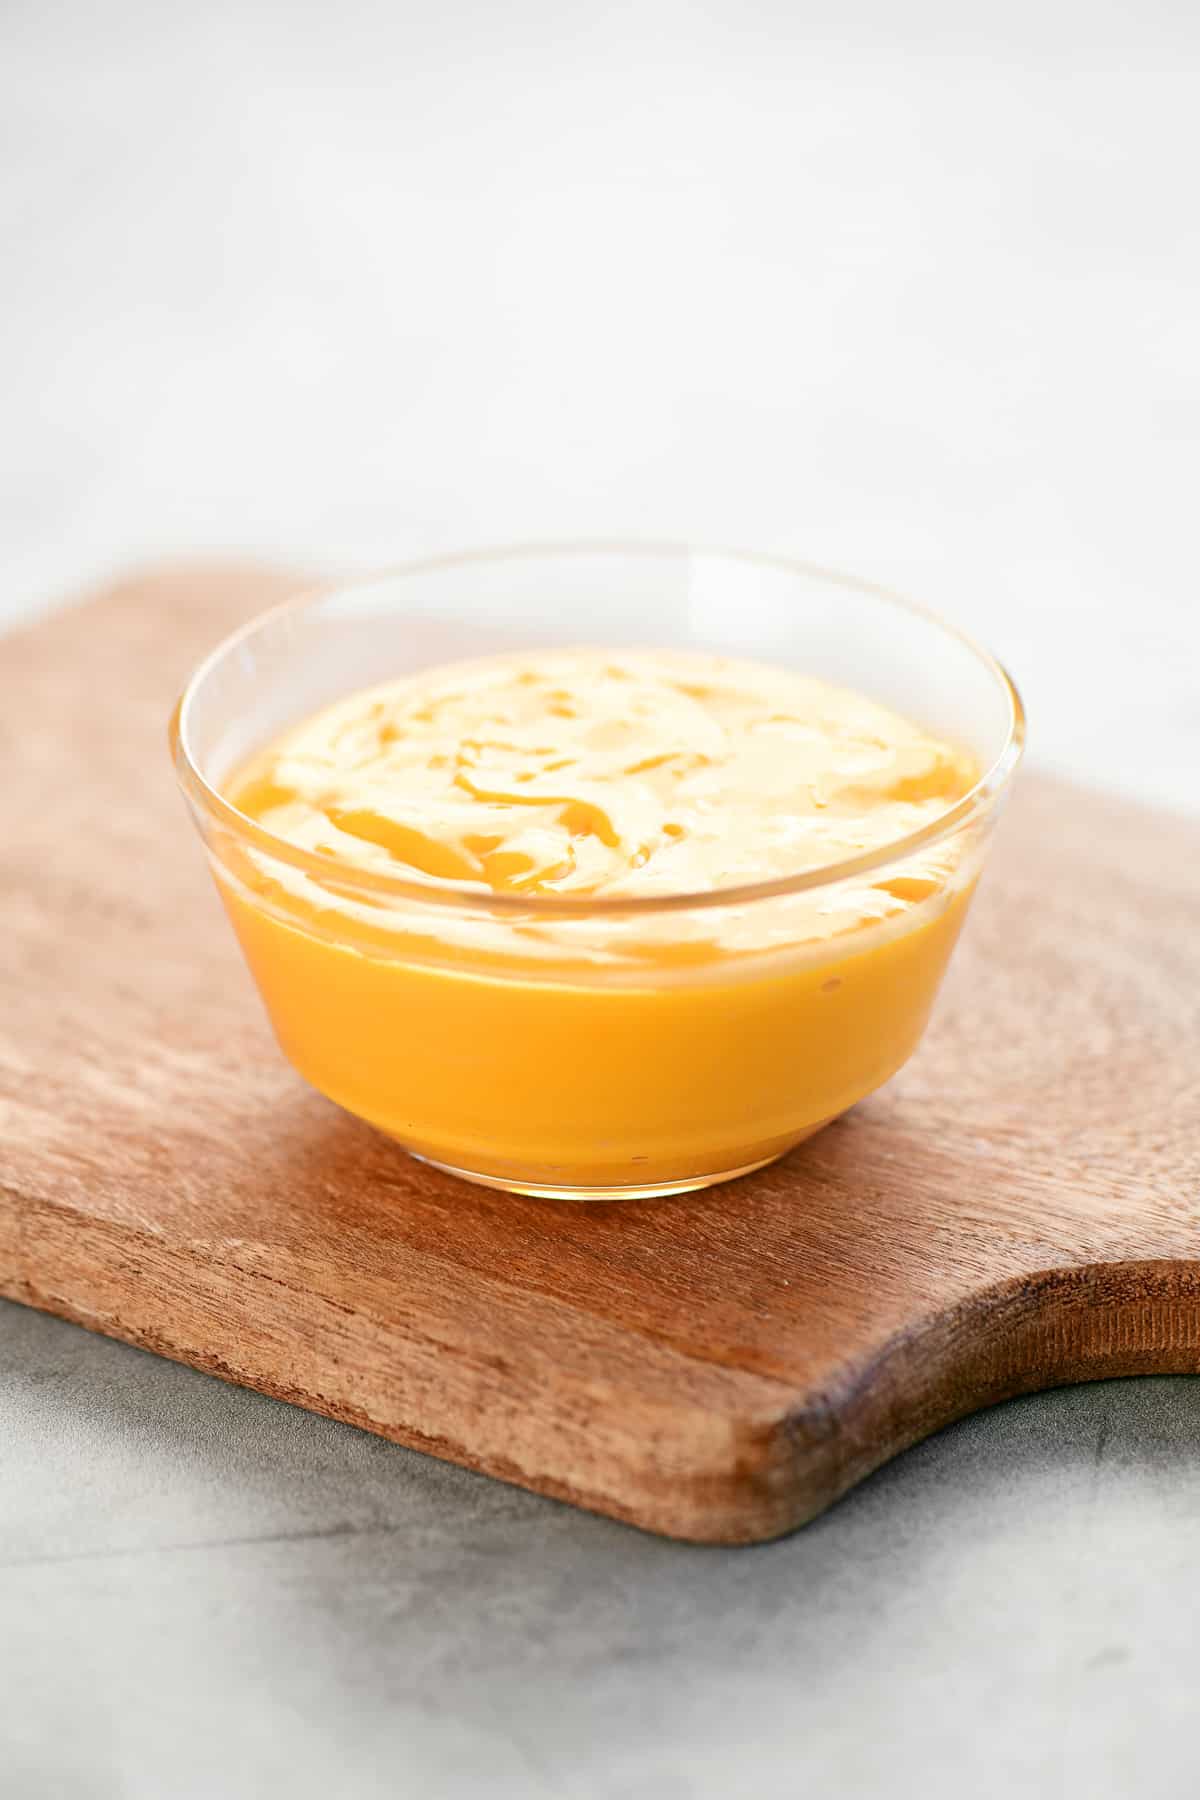 Cheese sauce in a plastic dipping bowl.